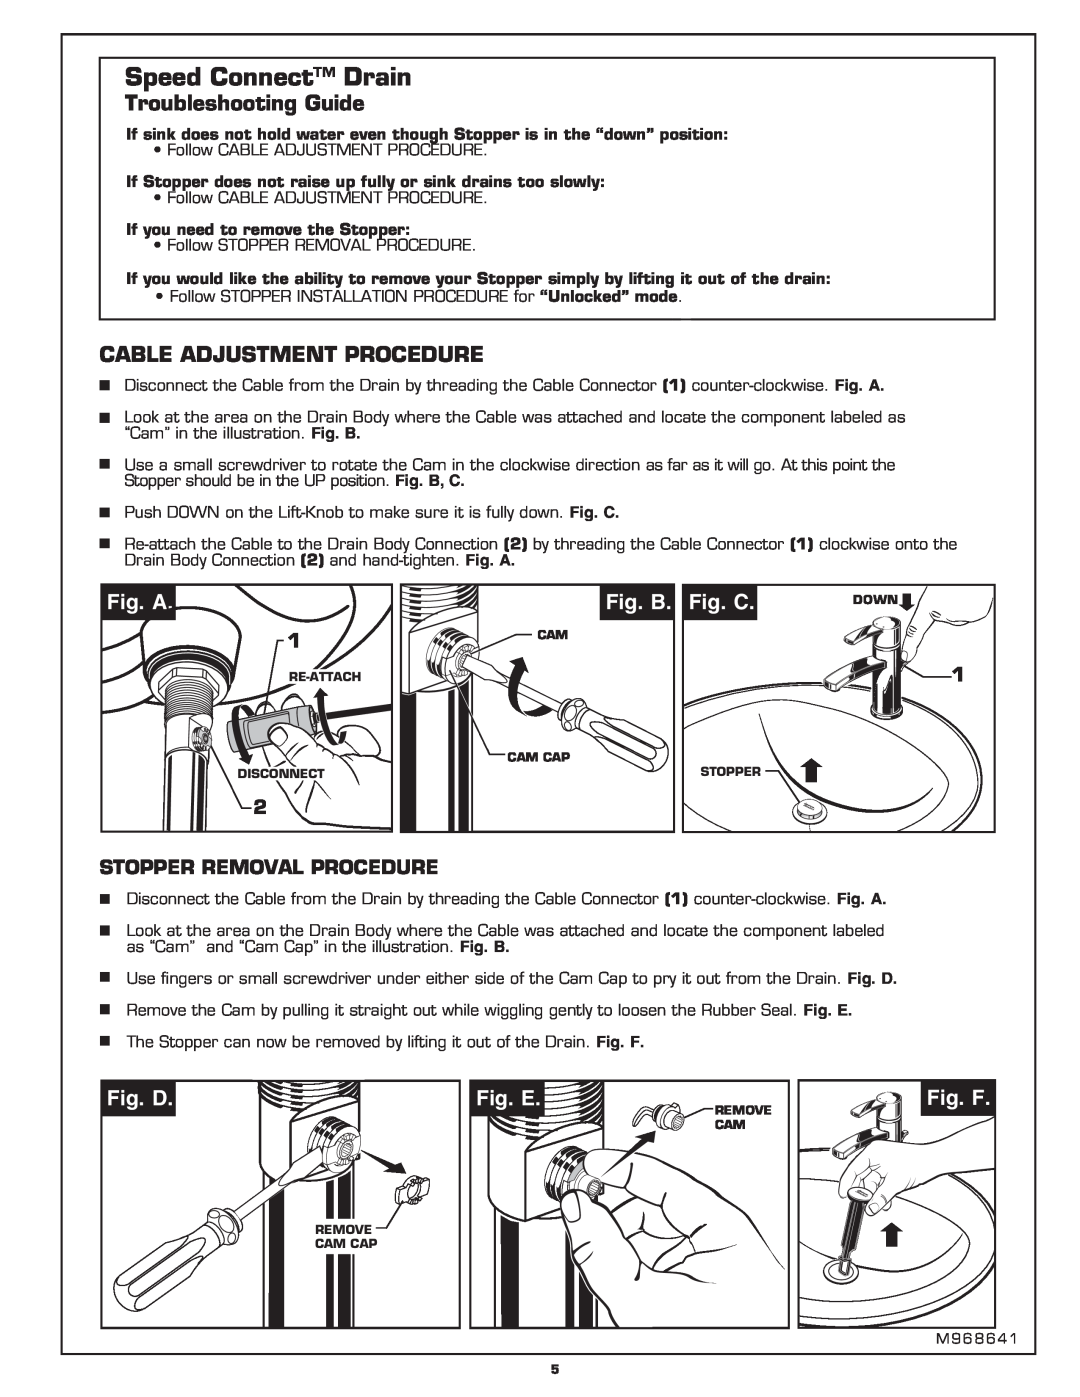 American Standard M968641 Troubleshooting Guide, Cable Adjustment Procedure, Fig. A, Fig. B, Fig. C, Fig. D, Fig. E 